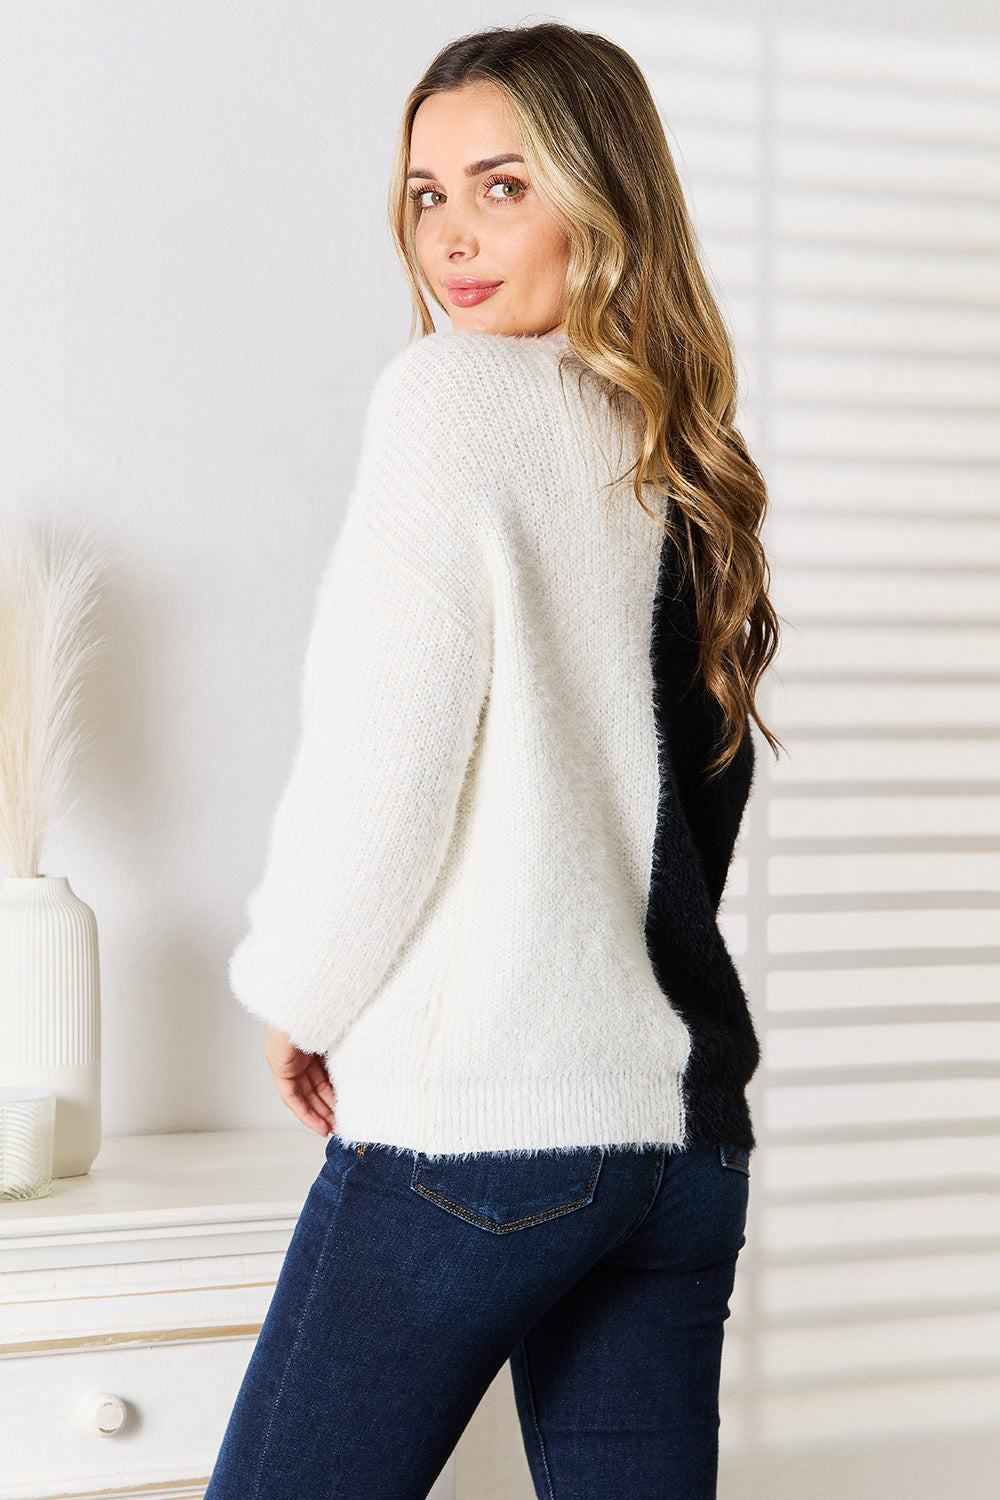 Black and White Color Block Cardigan - Inspired Eye Boutique